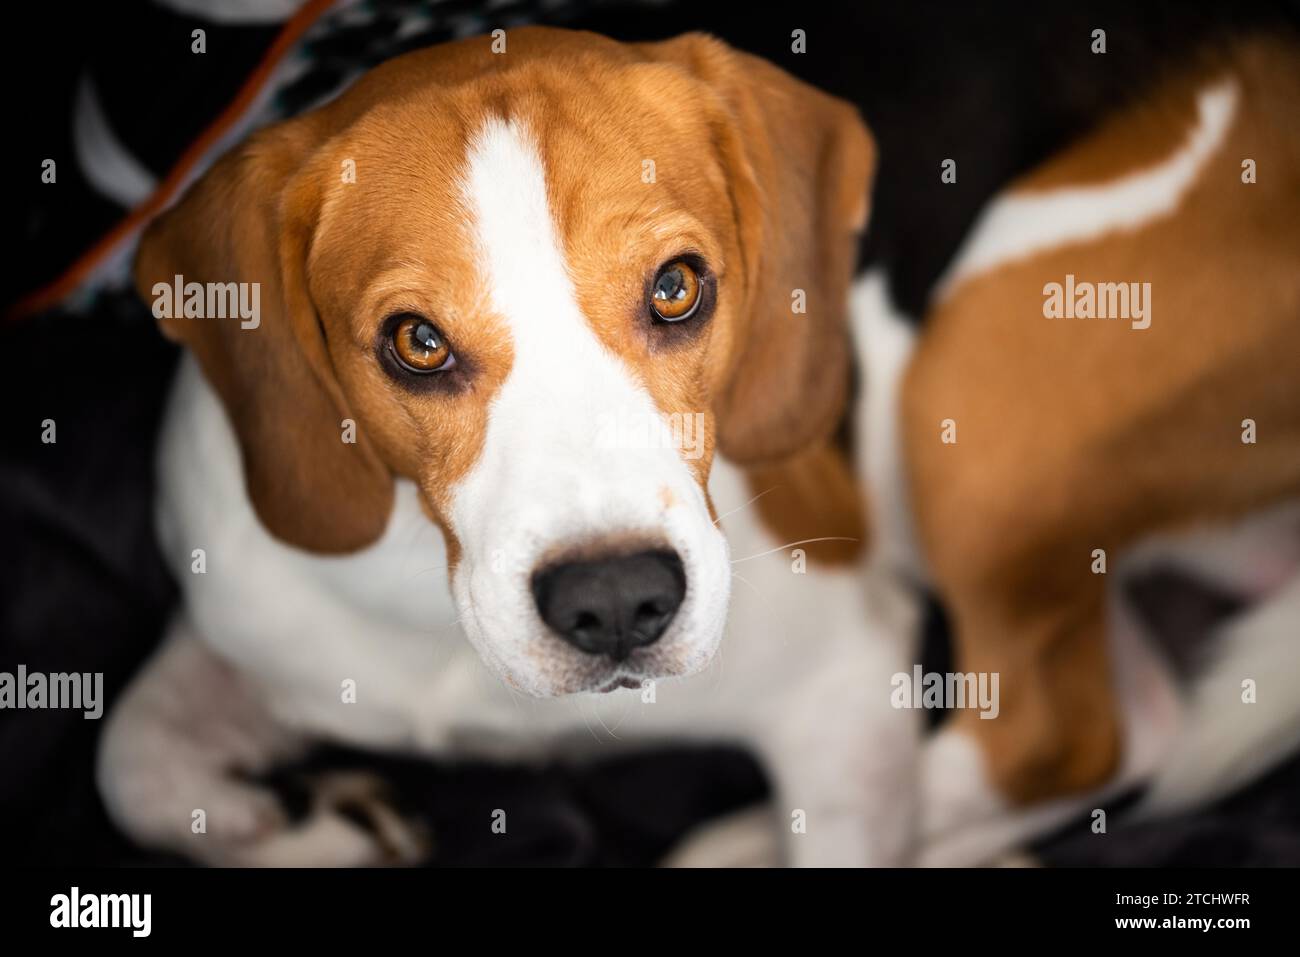 Beagle dog with big eyes lying down and looking up towards the camera. Portrait dark background Stock Photo